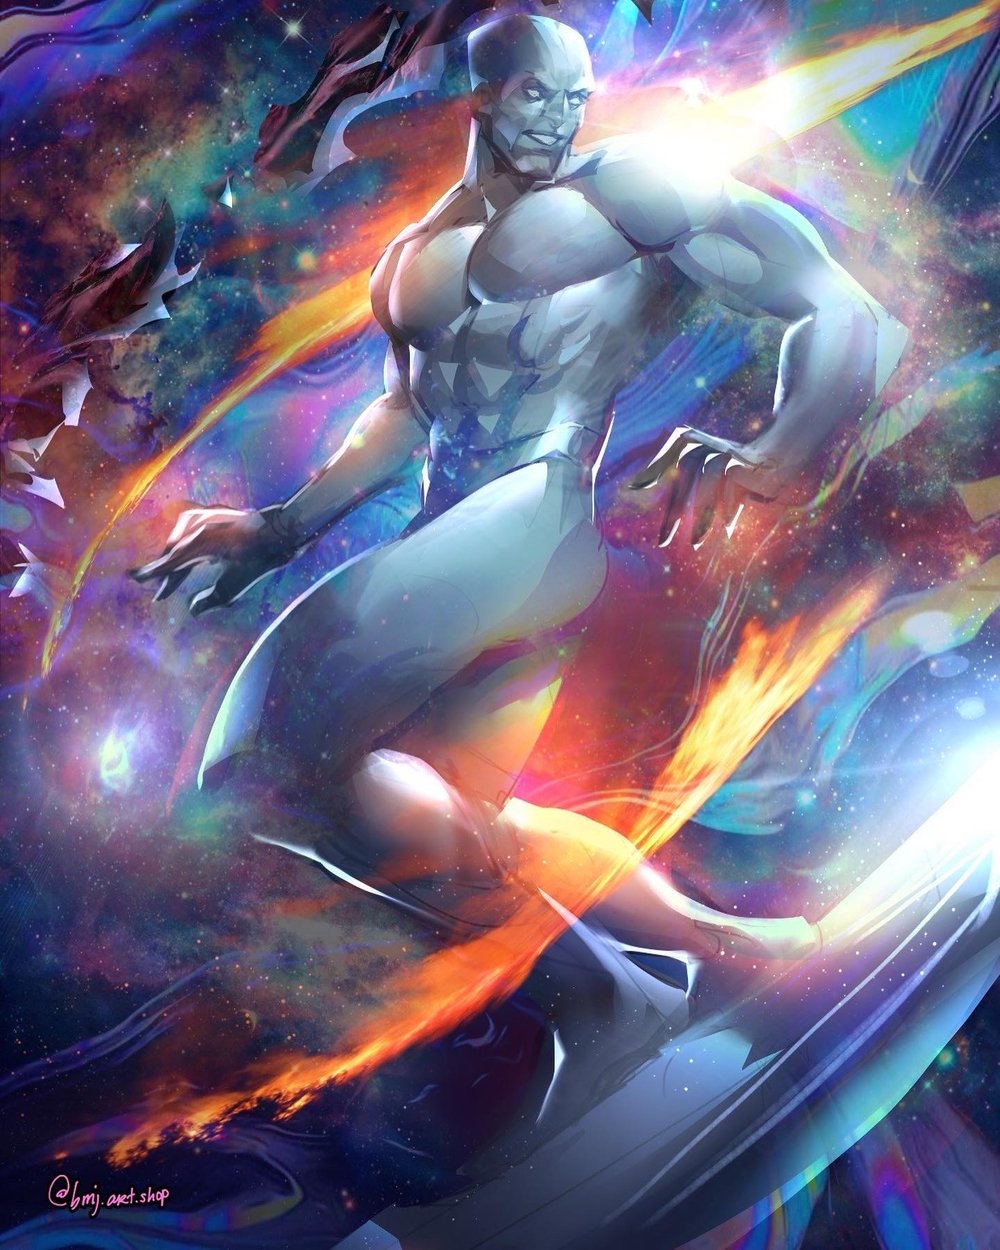 Image of The Silver Surfer